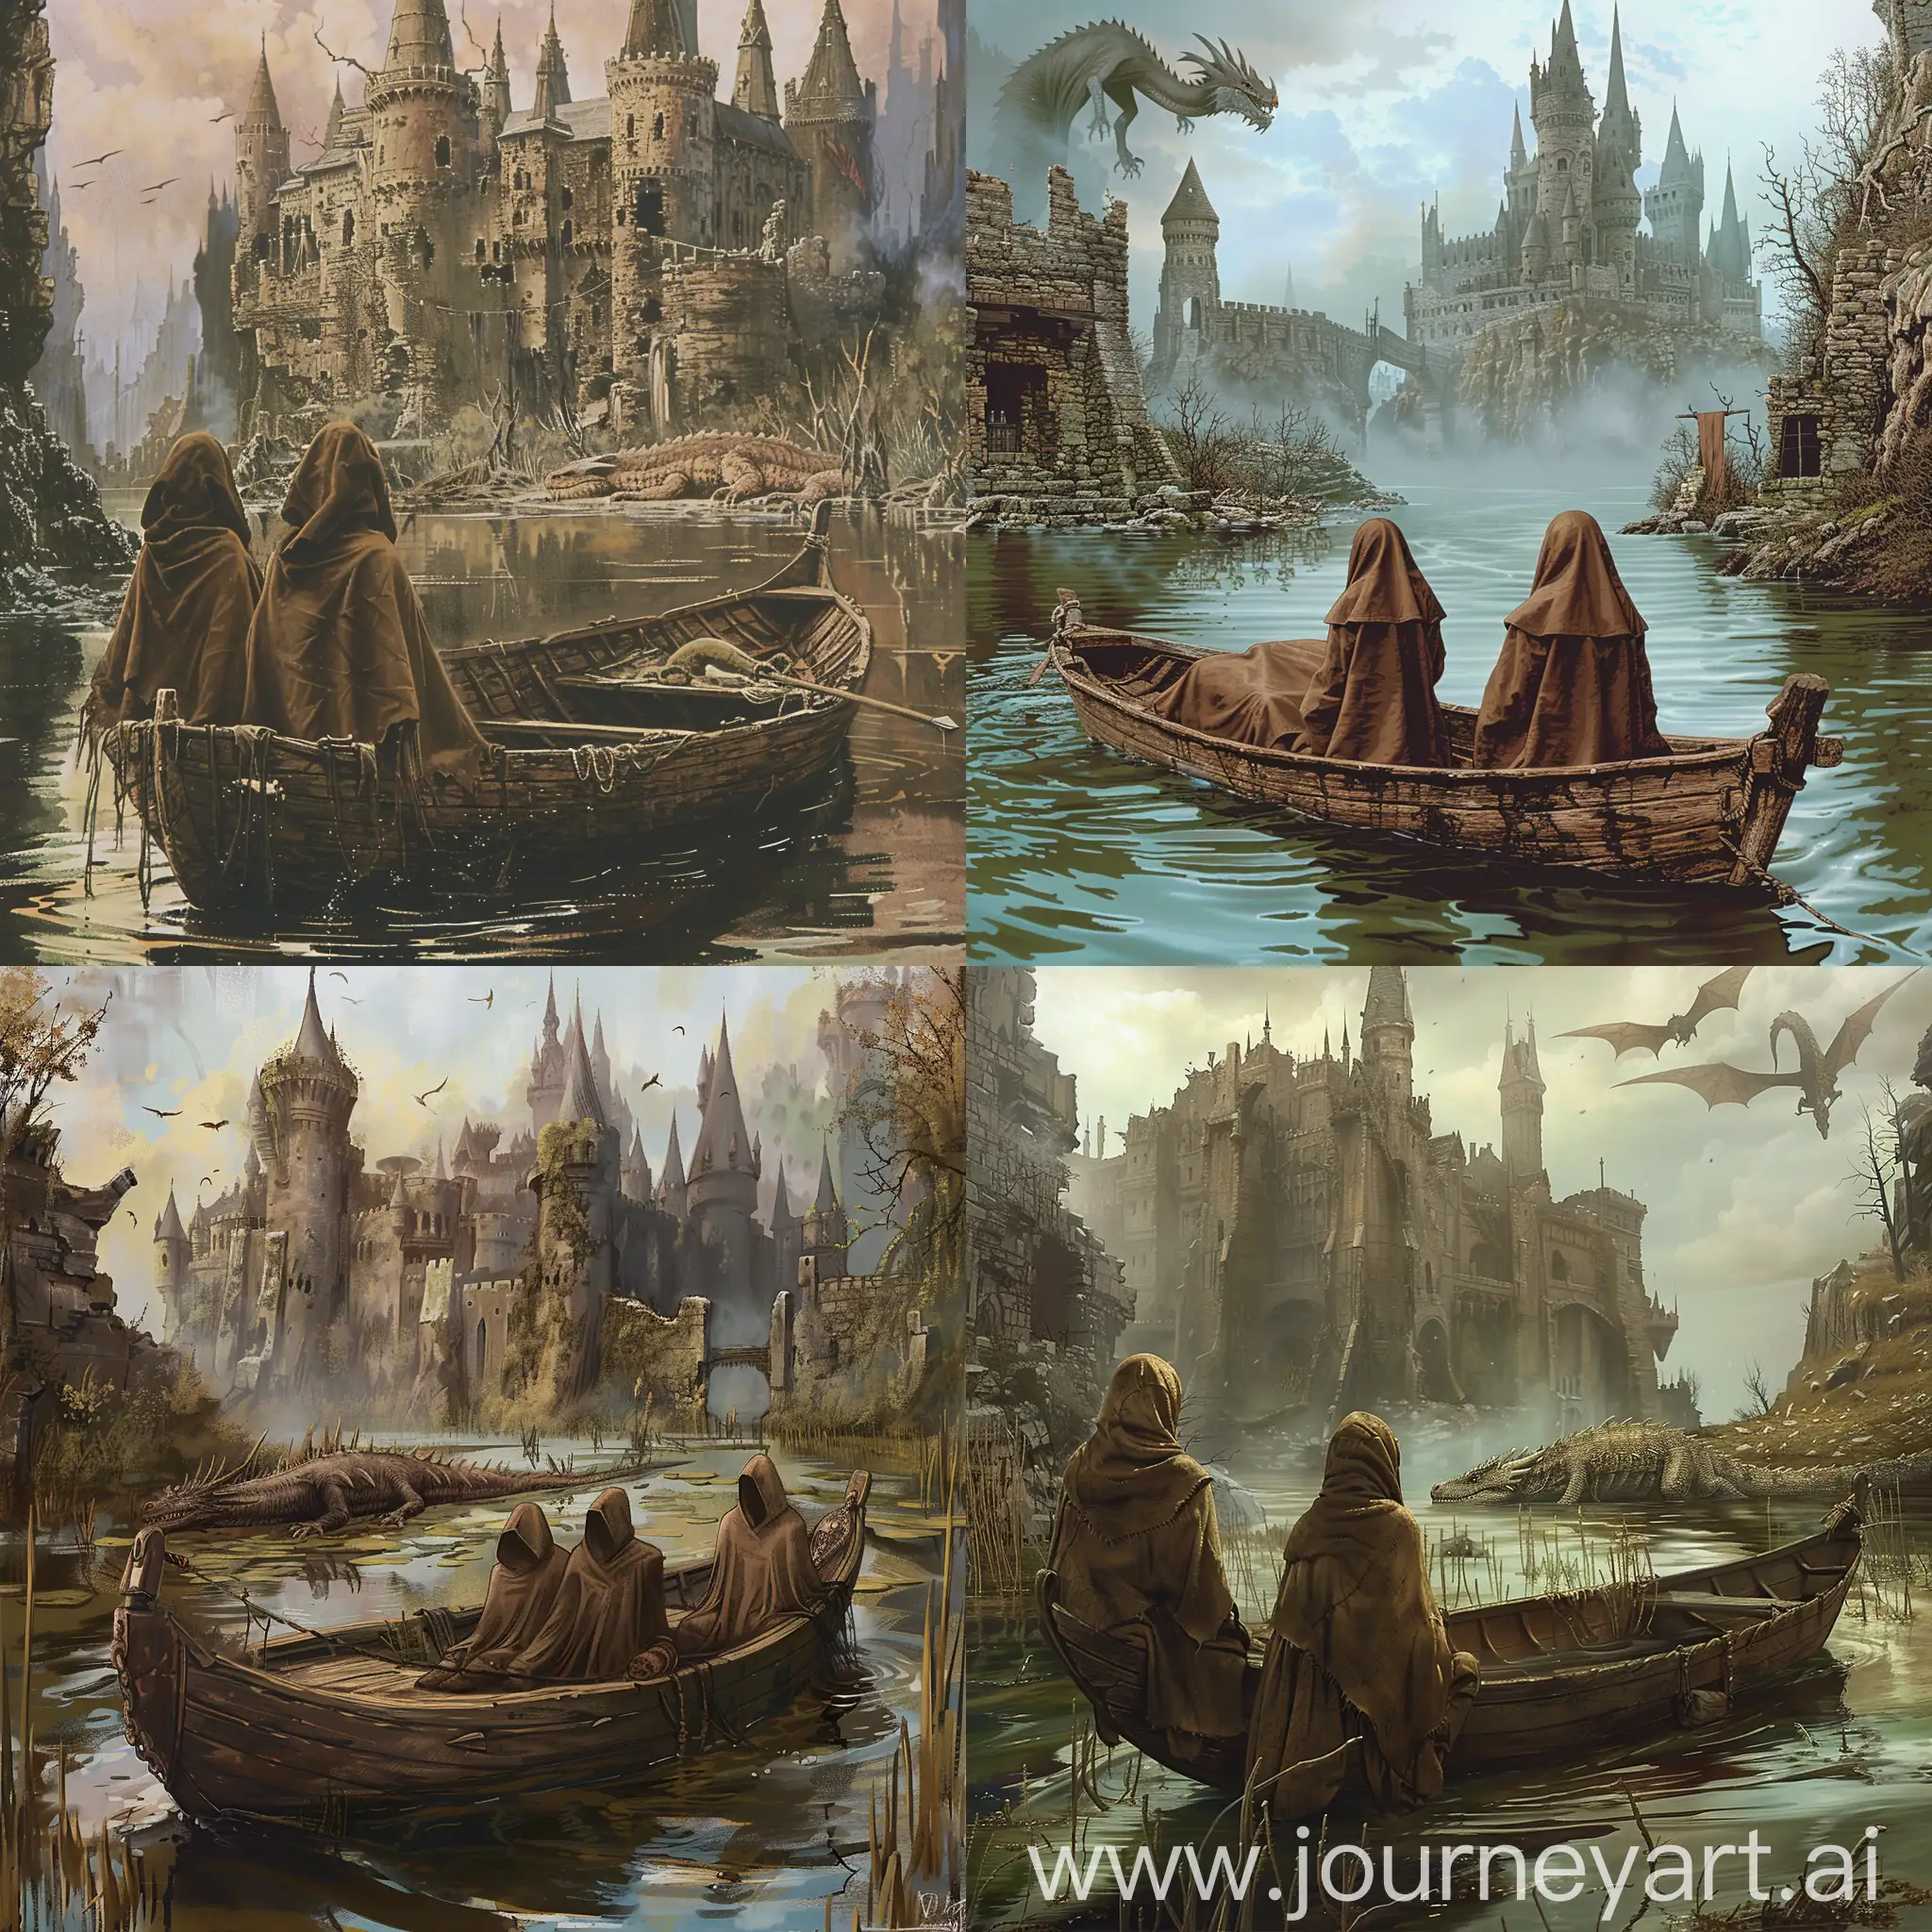 Mysterious-Swamp-Expedition-Explorers-on-a-Wooden-Boat-Encounter-a-Sleeping-Dragon-near-a-Ruined-Castle